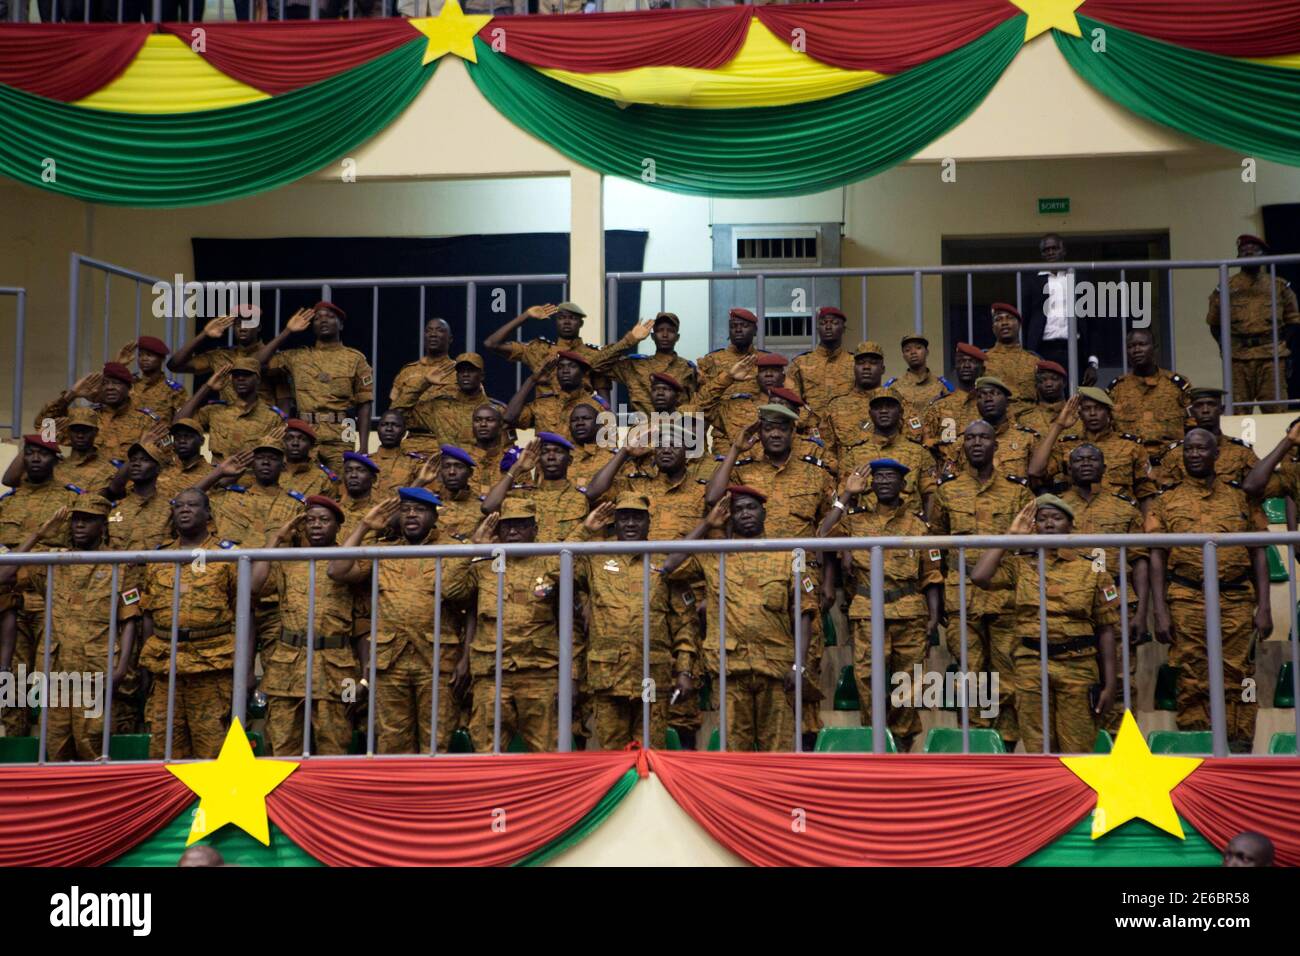 Soldiers salute during the swearing-in ceremony of Burkina Faso's President Michel Kafondo in Ouagadougou November 21, 2014. Kafando was chosen by a committee on Monday set up after former president Blaise Compaore resigned and fled on October 31 in the face of mass protests against his attempt to change the constitution and extend his 27-year rule. Kafondo, who was sworn into his post for the transitional period of one year, is faced with the task of leading the West African country to elections in a year following a brief military takeover.    REUTERS/Joe Penney (BURKINA FASO - Tags: POLITIC Stock Photo